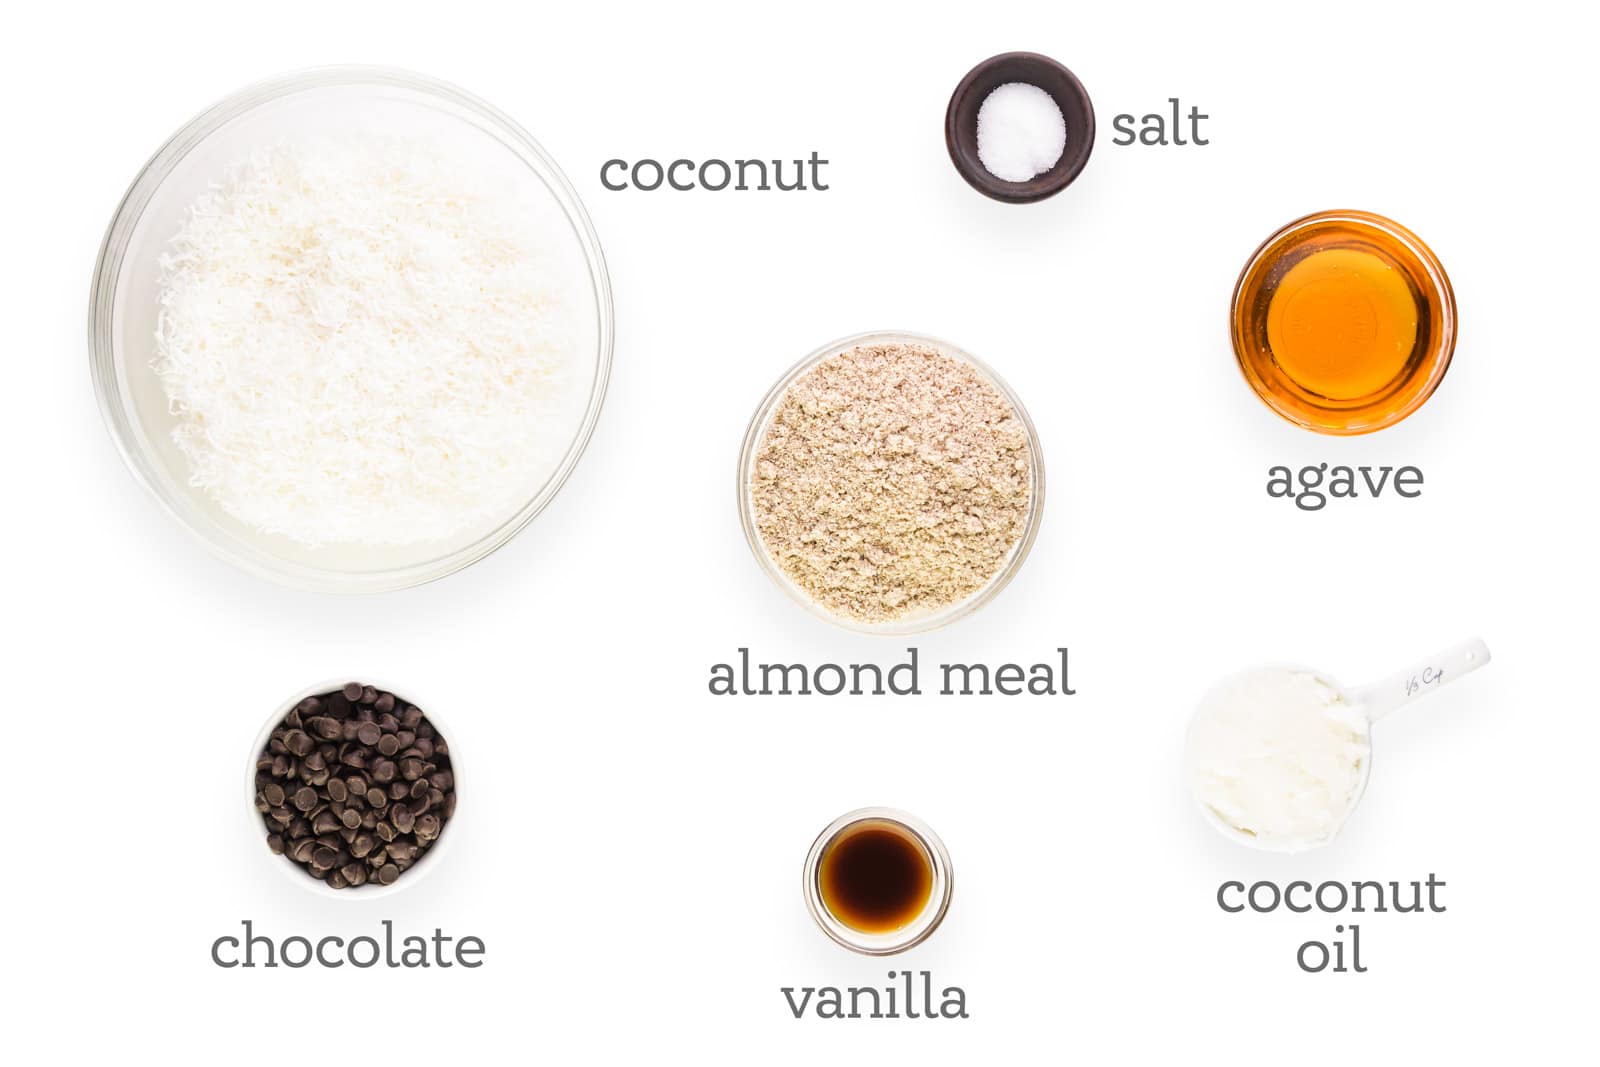 Ingredients are laid out. The labels read, "coconut, salt, agave, almond meal, coconut oil, vanilla, and chocolate."